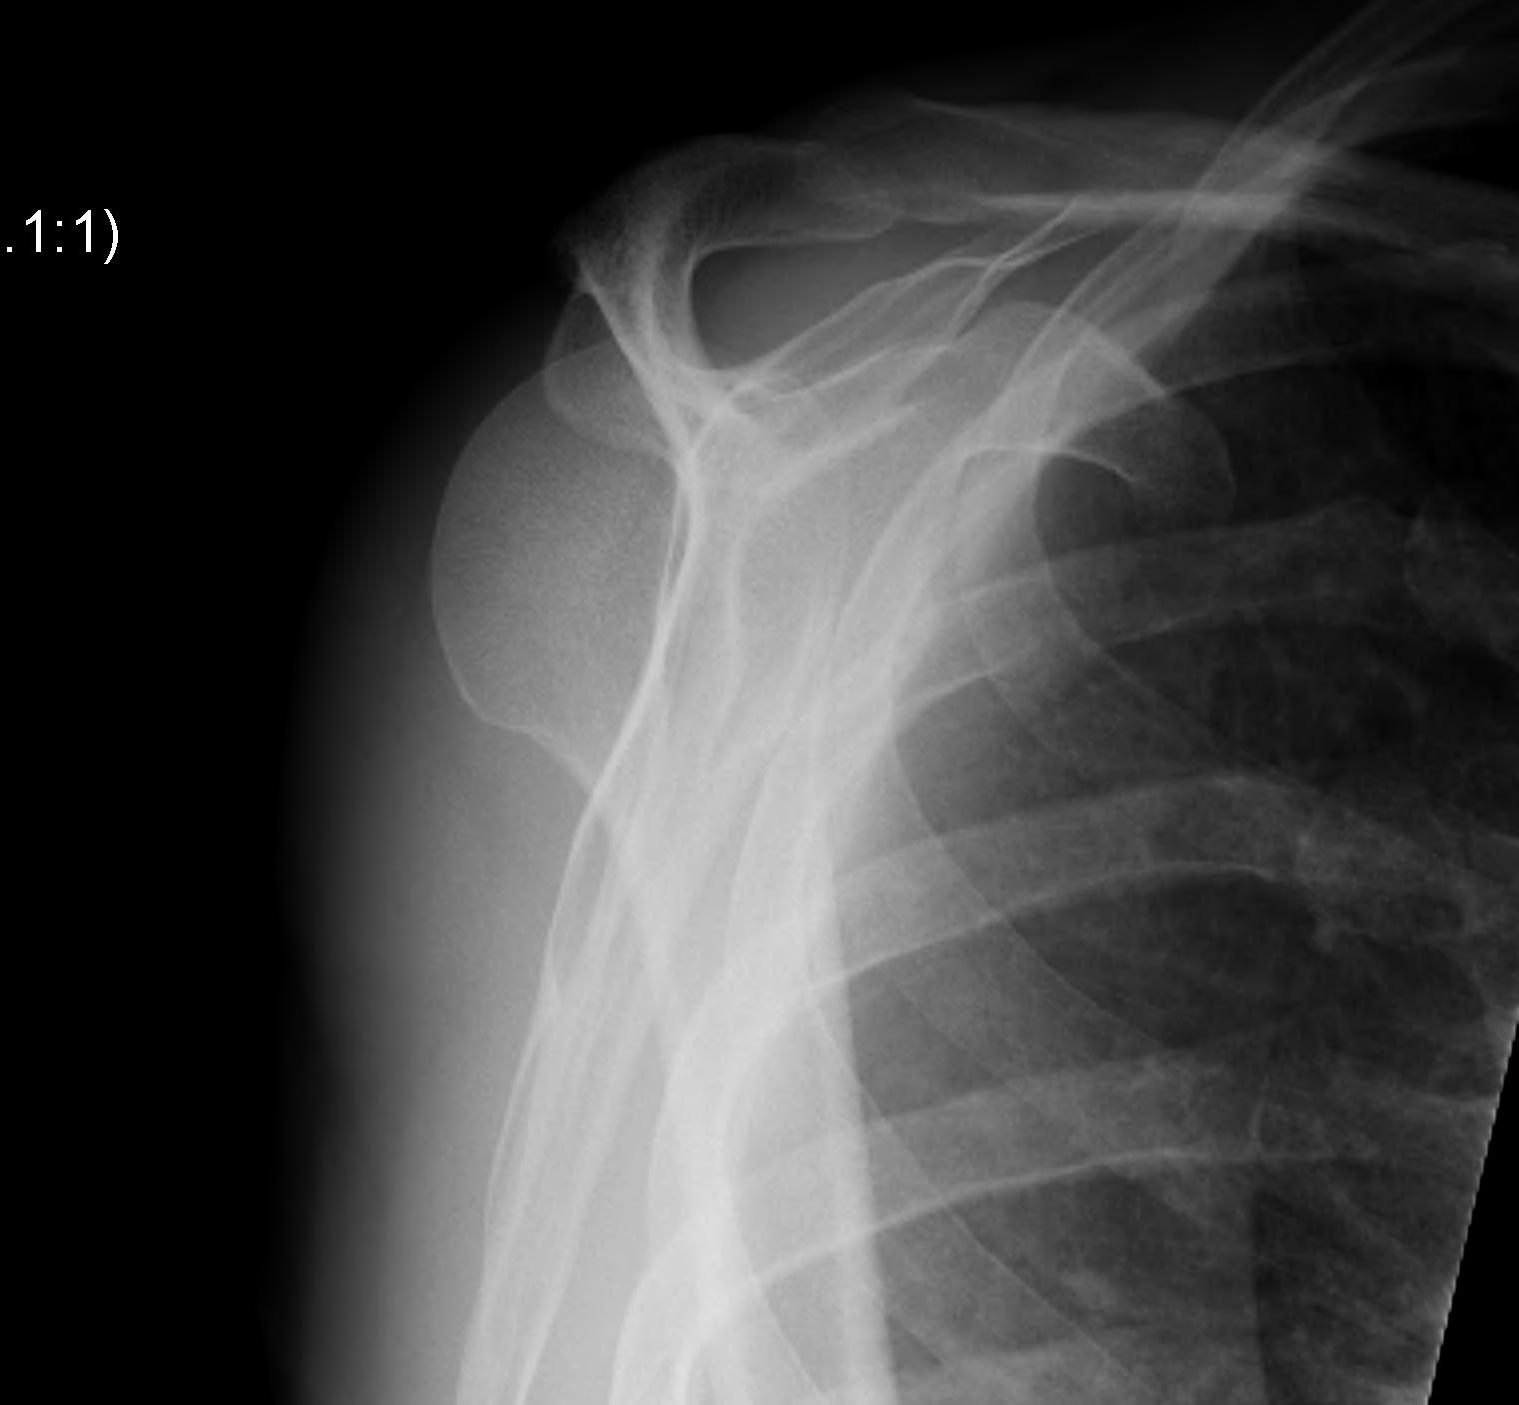 Posterior Shoulder Dislocation Lateral